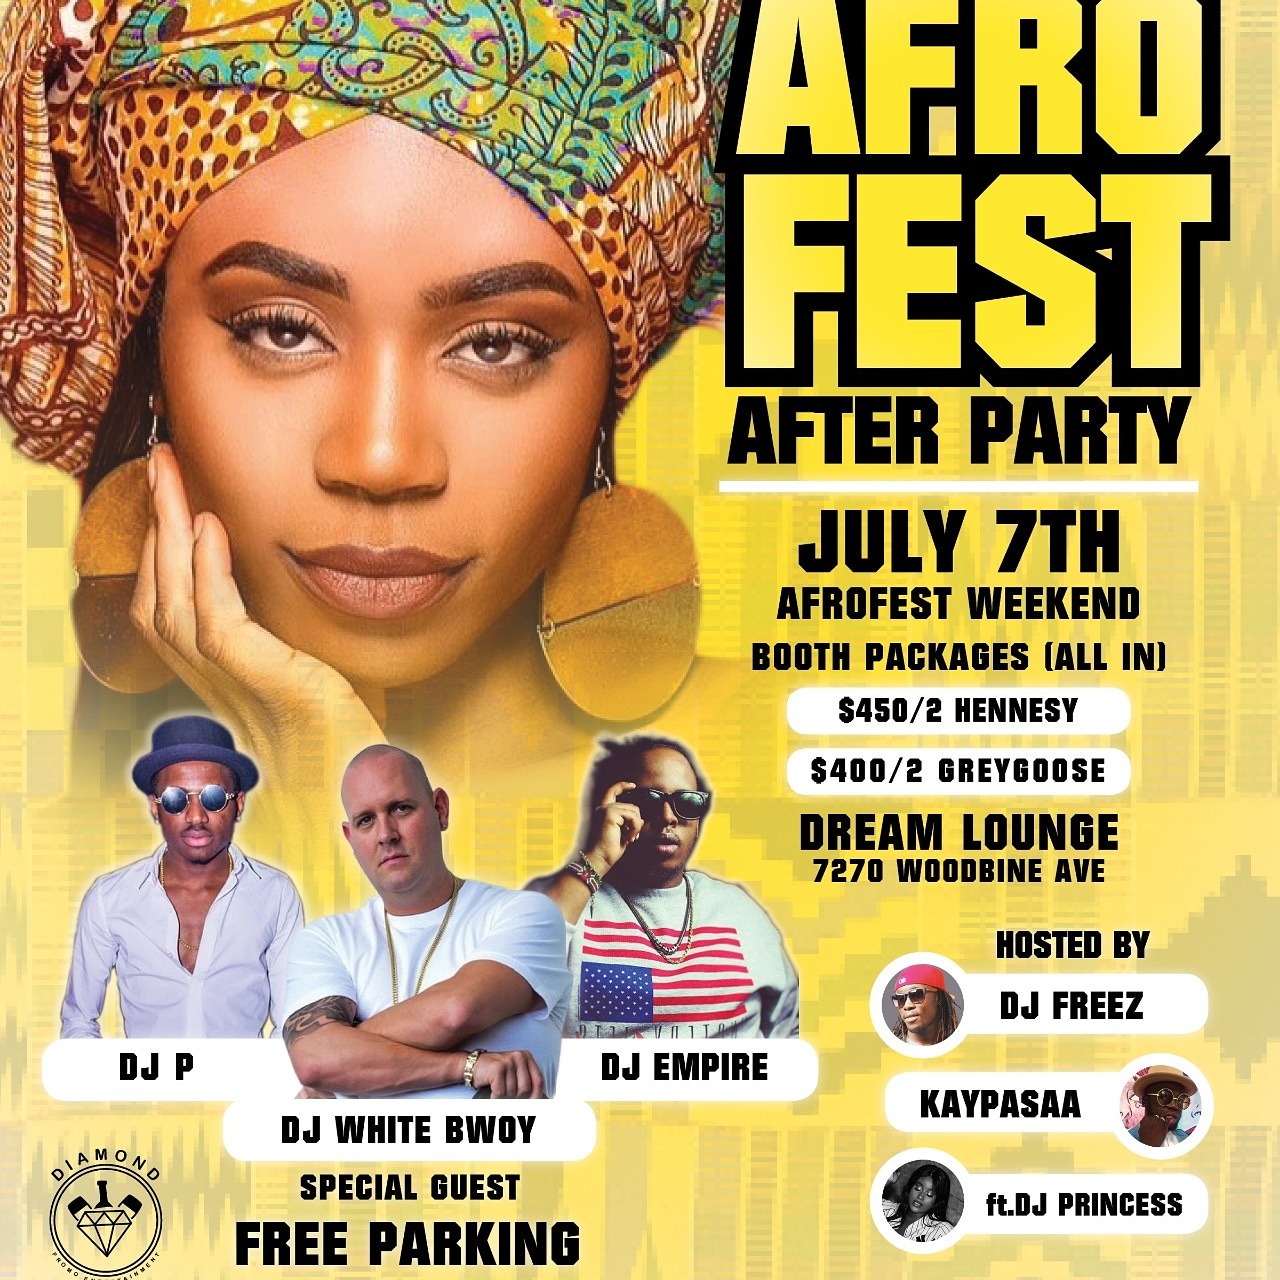 THE AFRO FEST AFTER PARTY